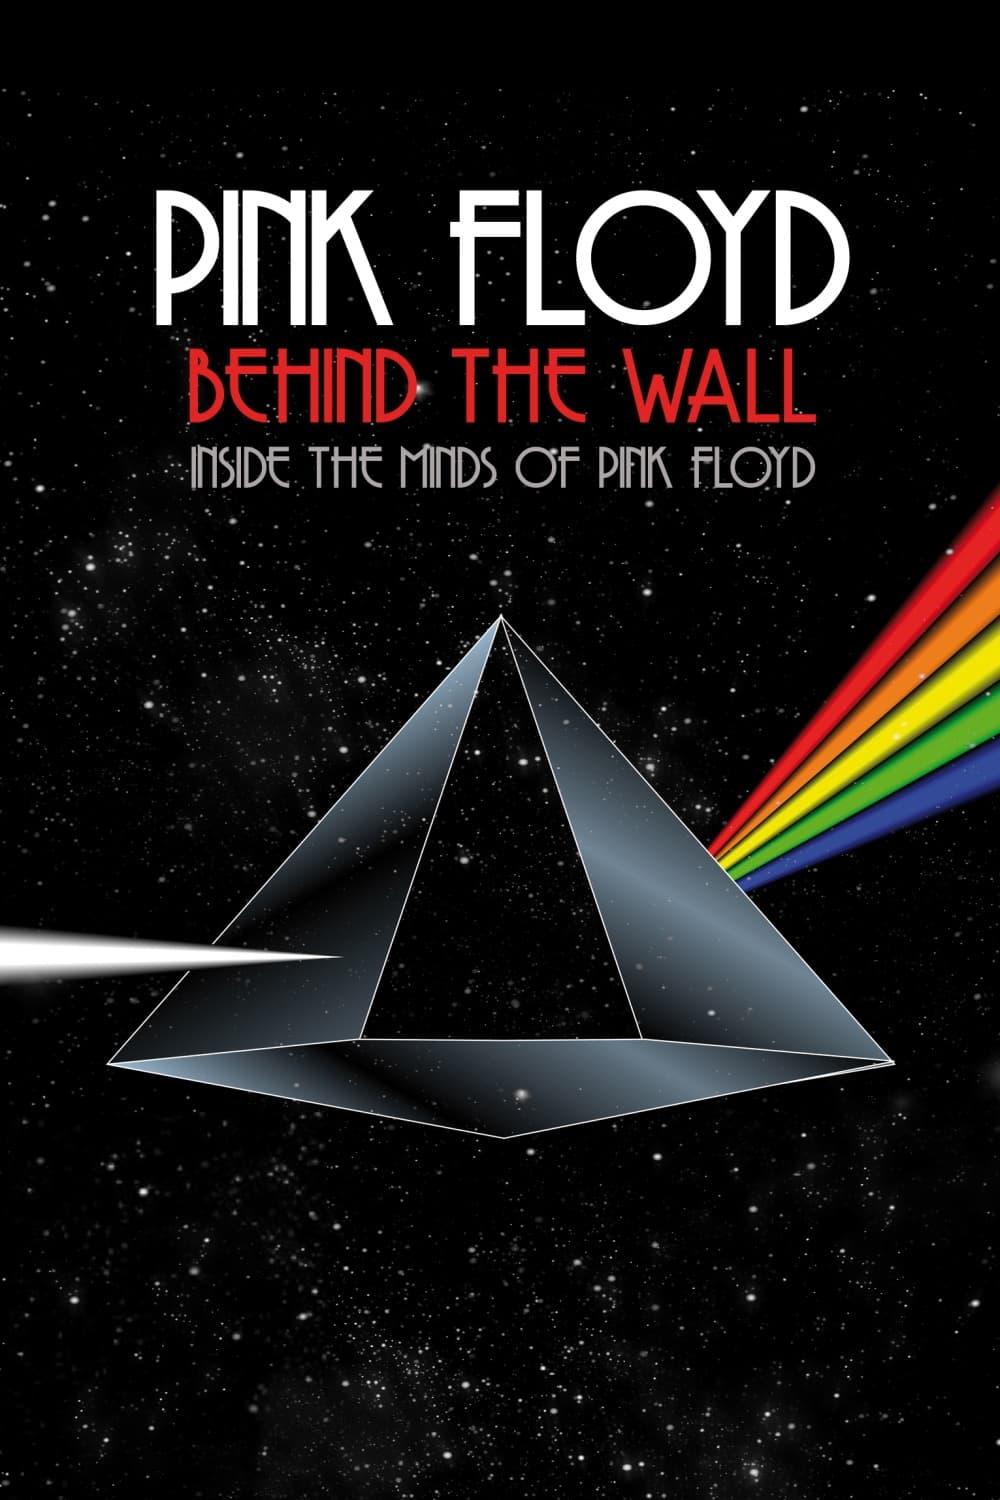 Pink Floyd: Behind the Wall poster